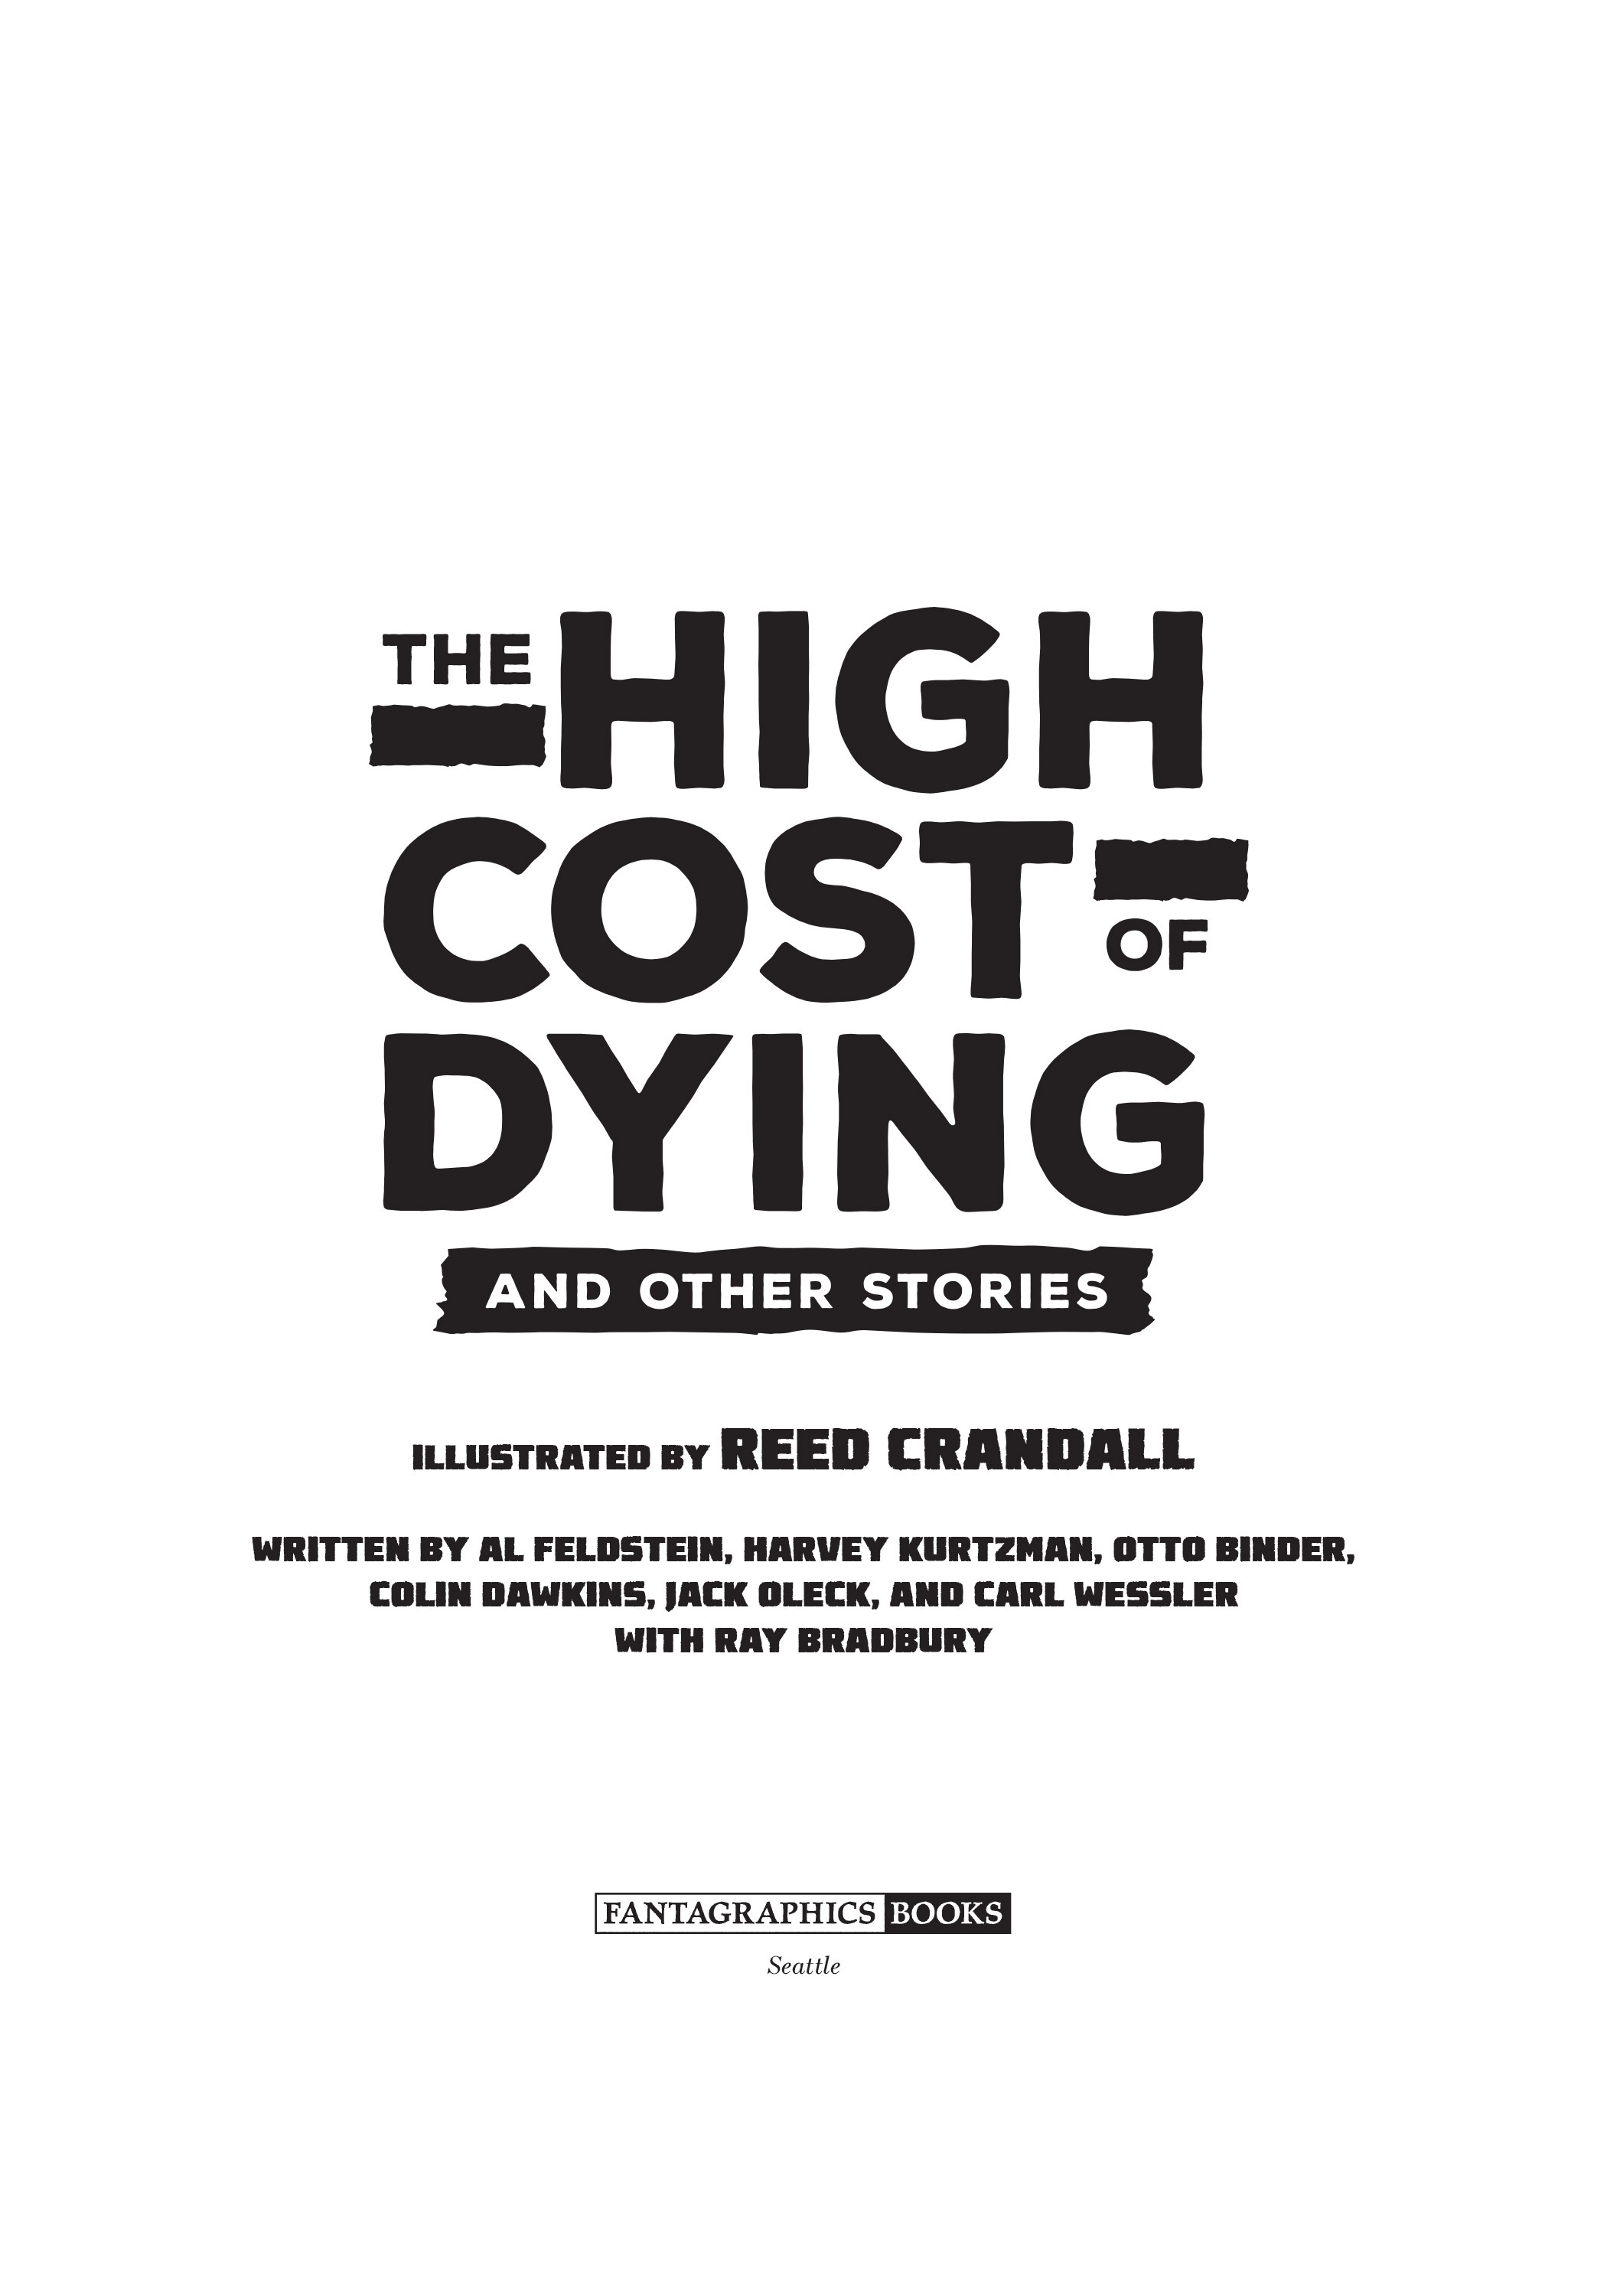 Read online The High Cost of Dying and Other Stories comic -  Issue # TPB - 4